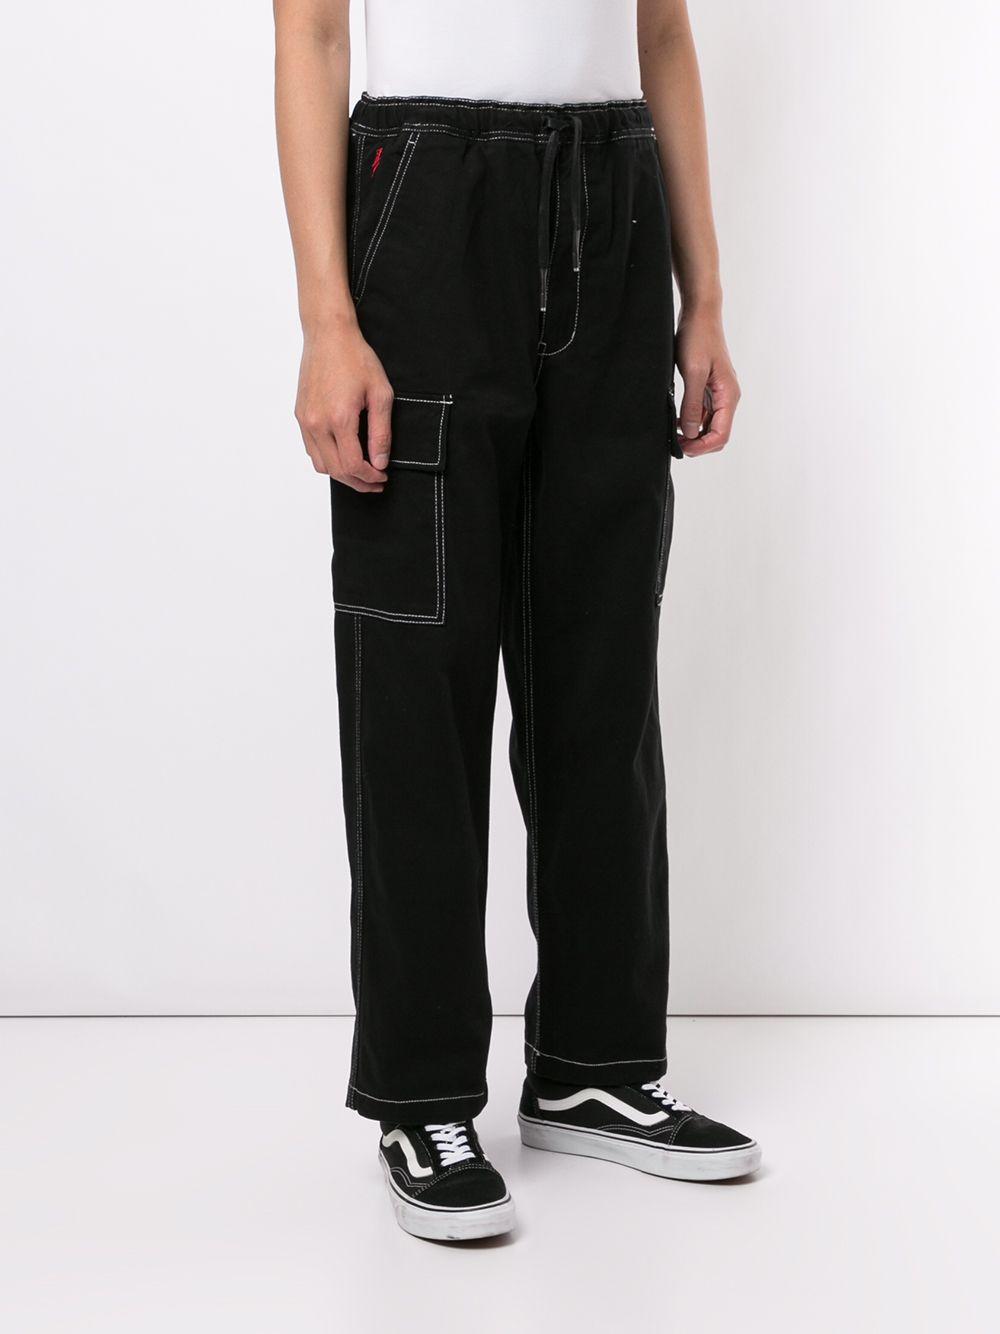 Izzue Contrast-stitch Cargo Trousers in Black for Men - Lyst